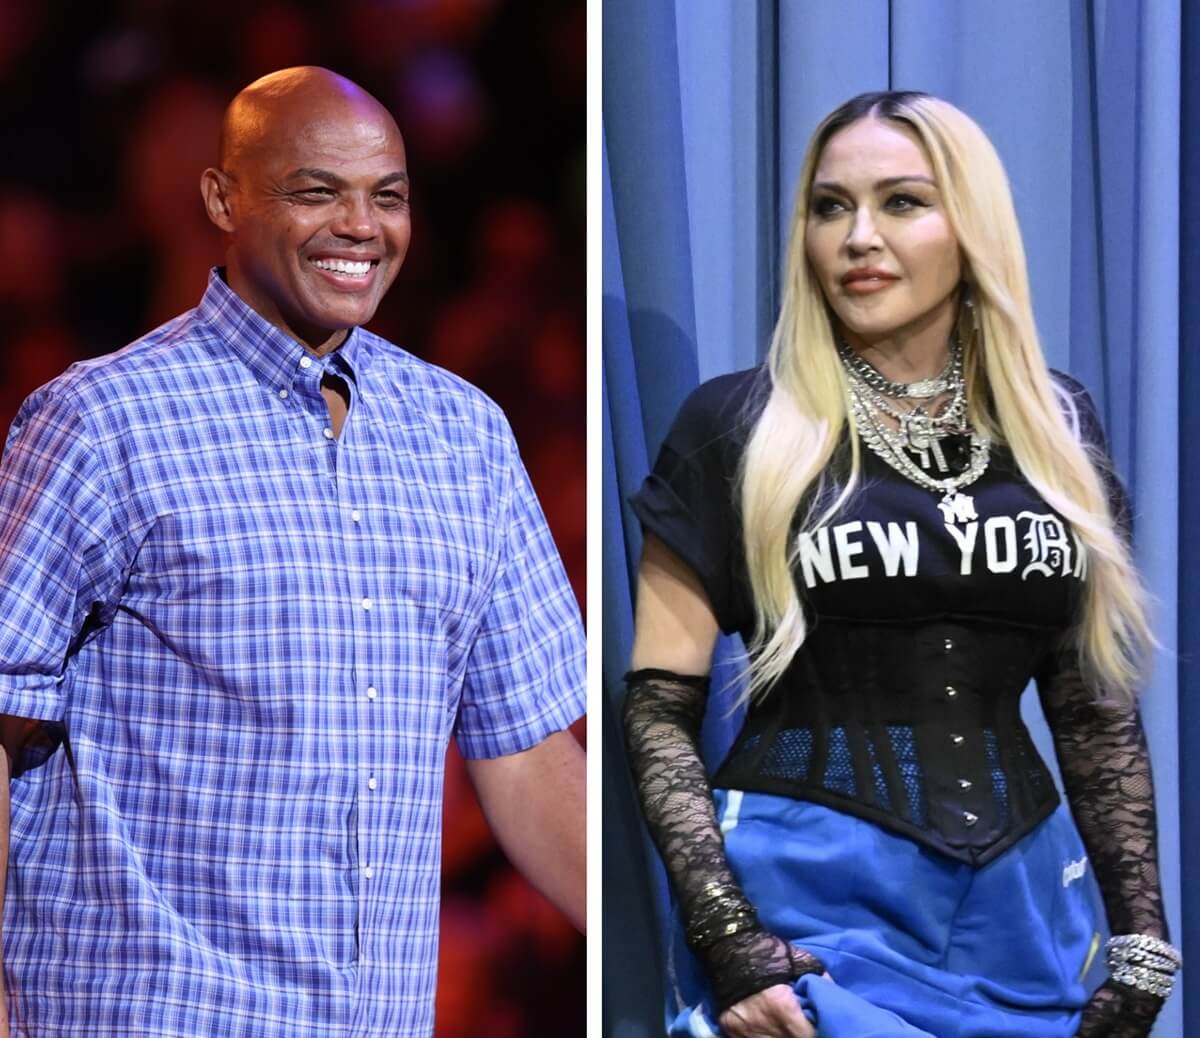 (L) Charles Barkley is inducted into the Phoenix Suns Ring of Honor, (R) Madonna arrives on the set of 'The Tonight Show Starring Jimmy Fallon'